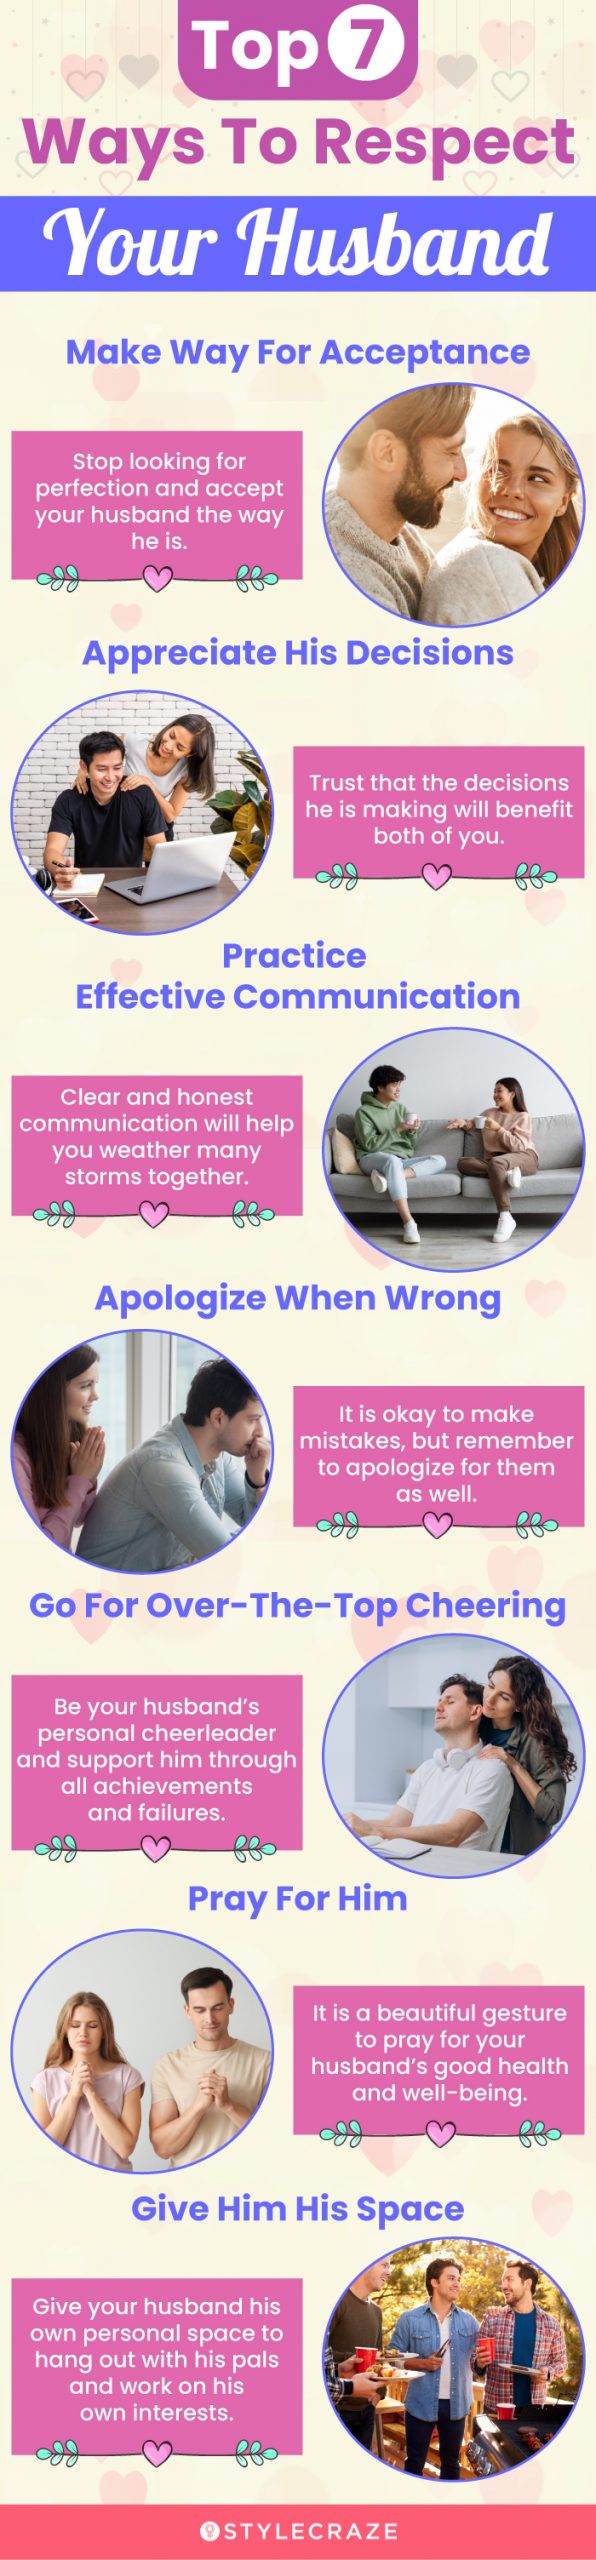 top 7 ways to respect your husband (infographic)